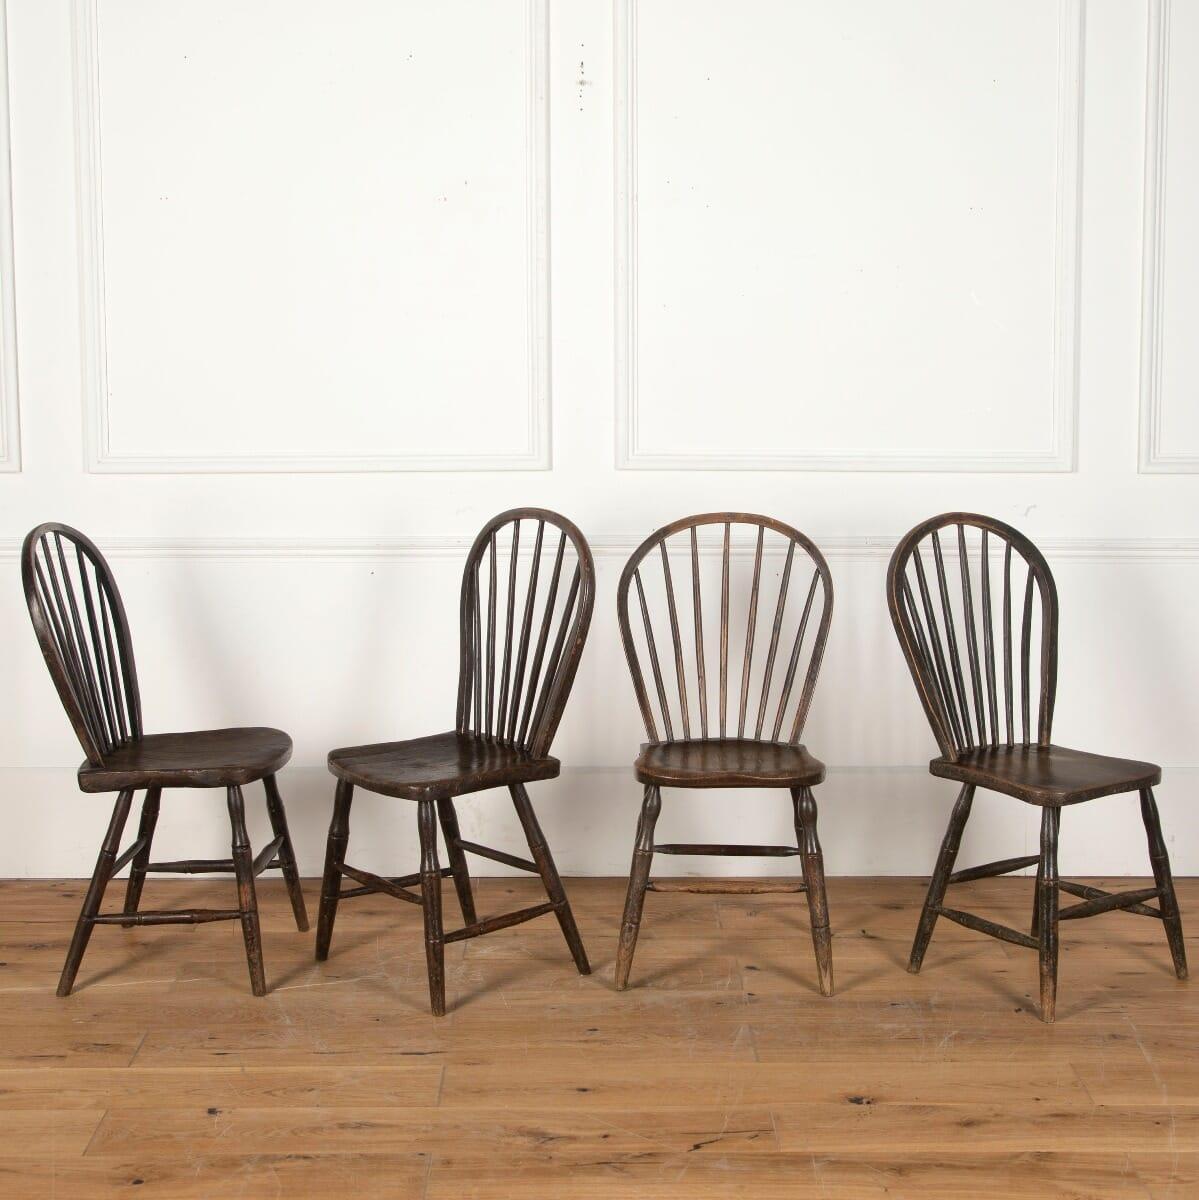 Matched set of four 19th century west country hoop and stick back chairs.

These primitive chairs represent centuries of traditional community craftsmanship.

Sturdy and practical, they will bring rustic charm to a contemporary interior.